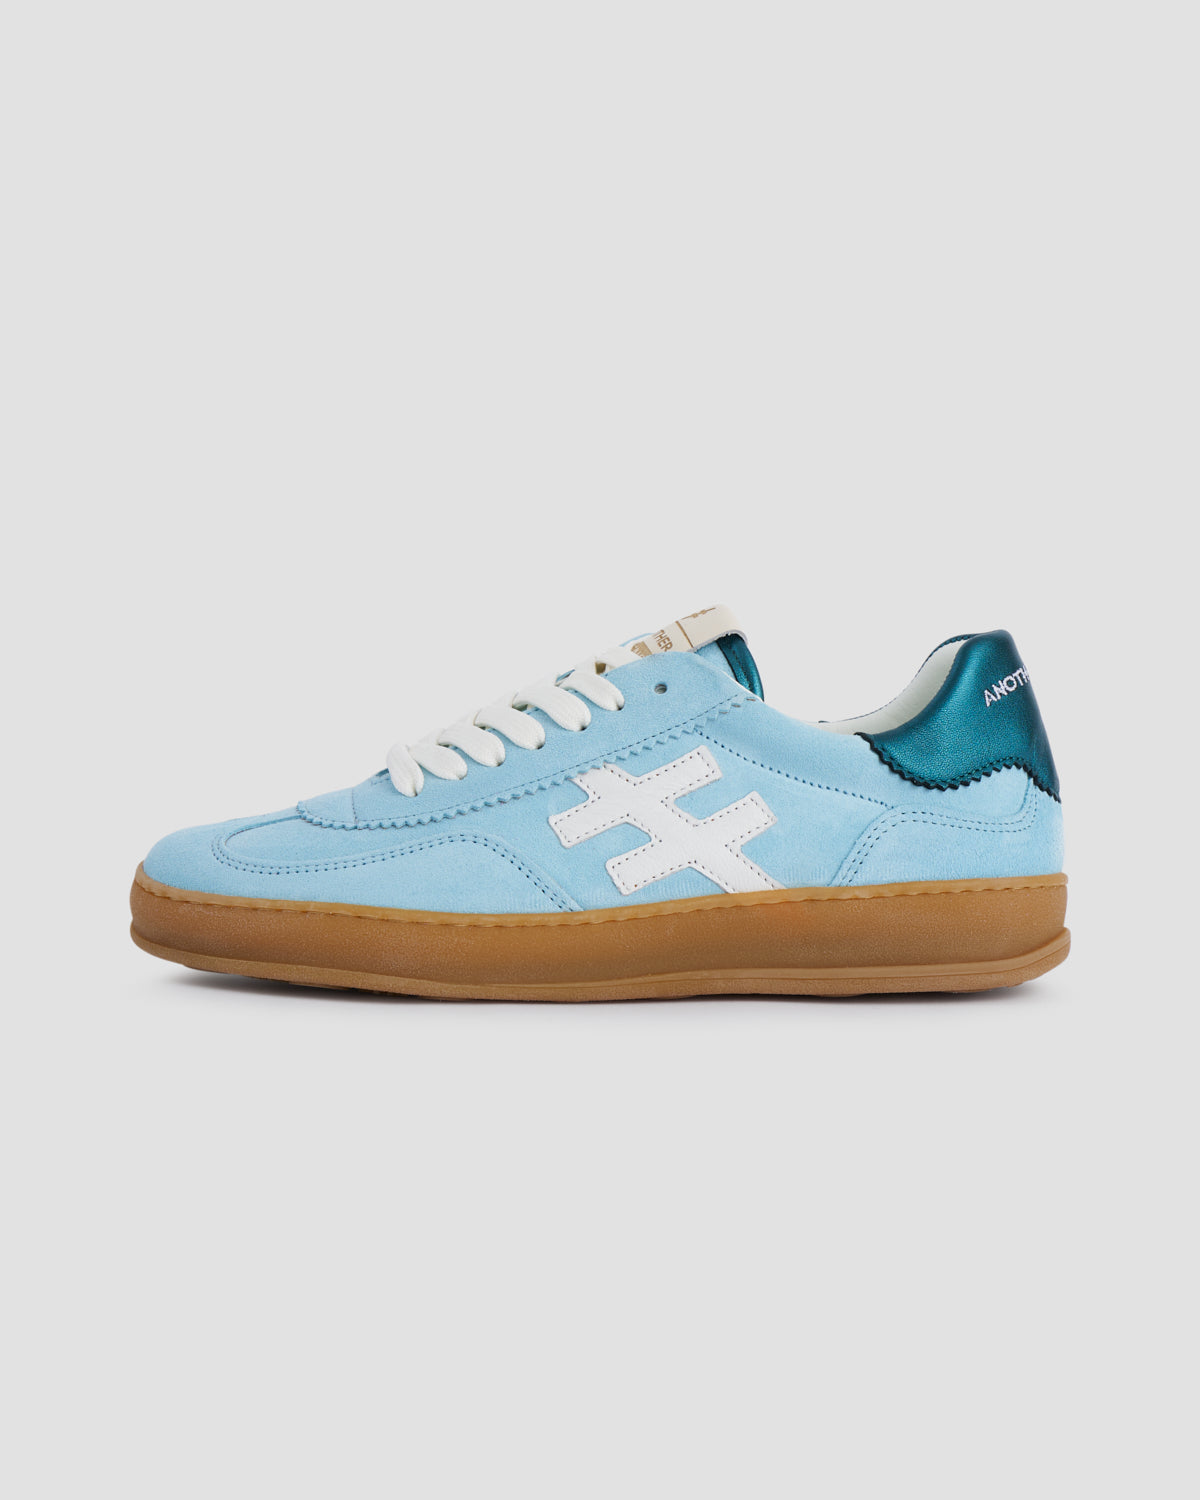 Another Trend - Blue Trainer